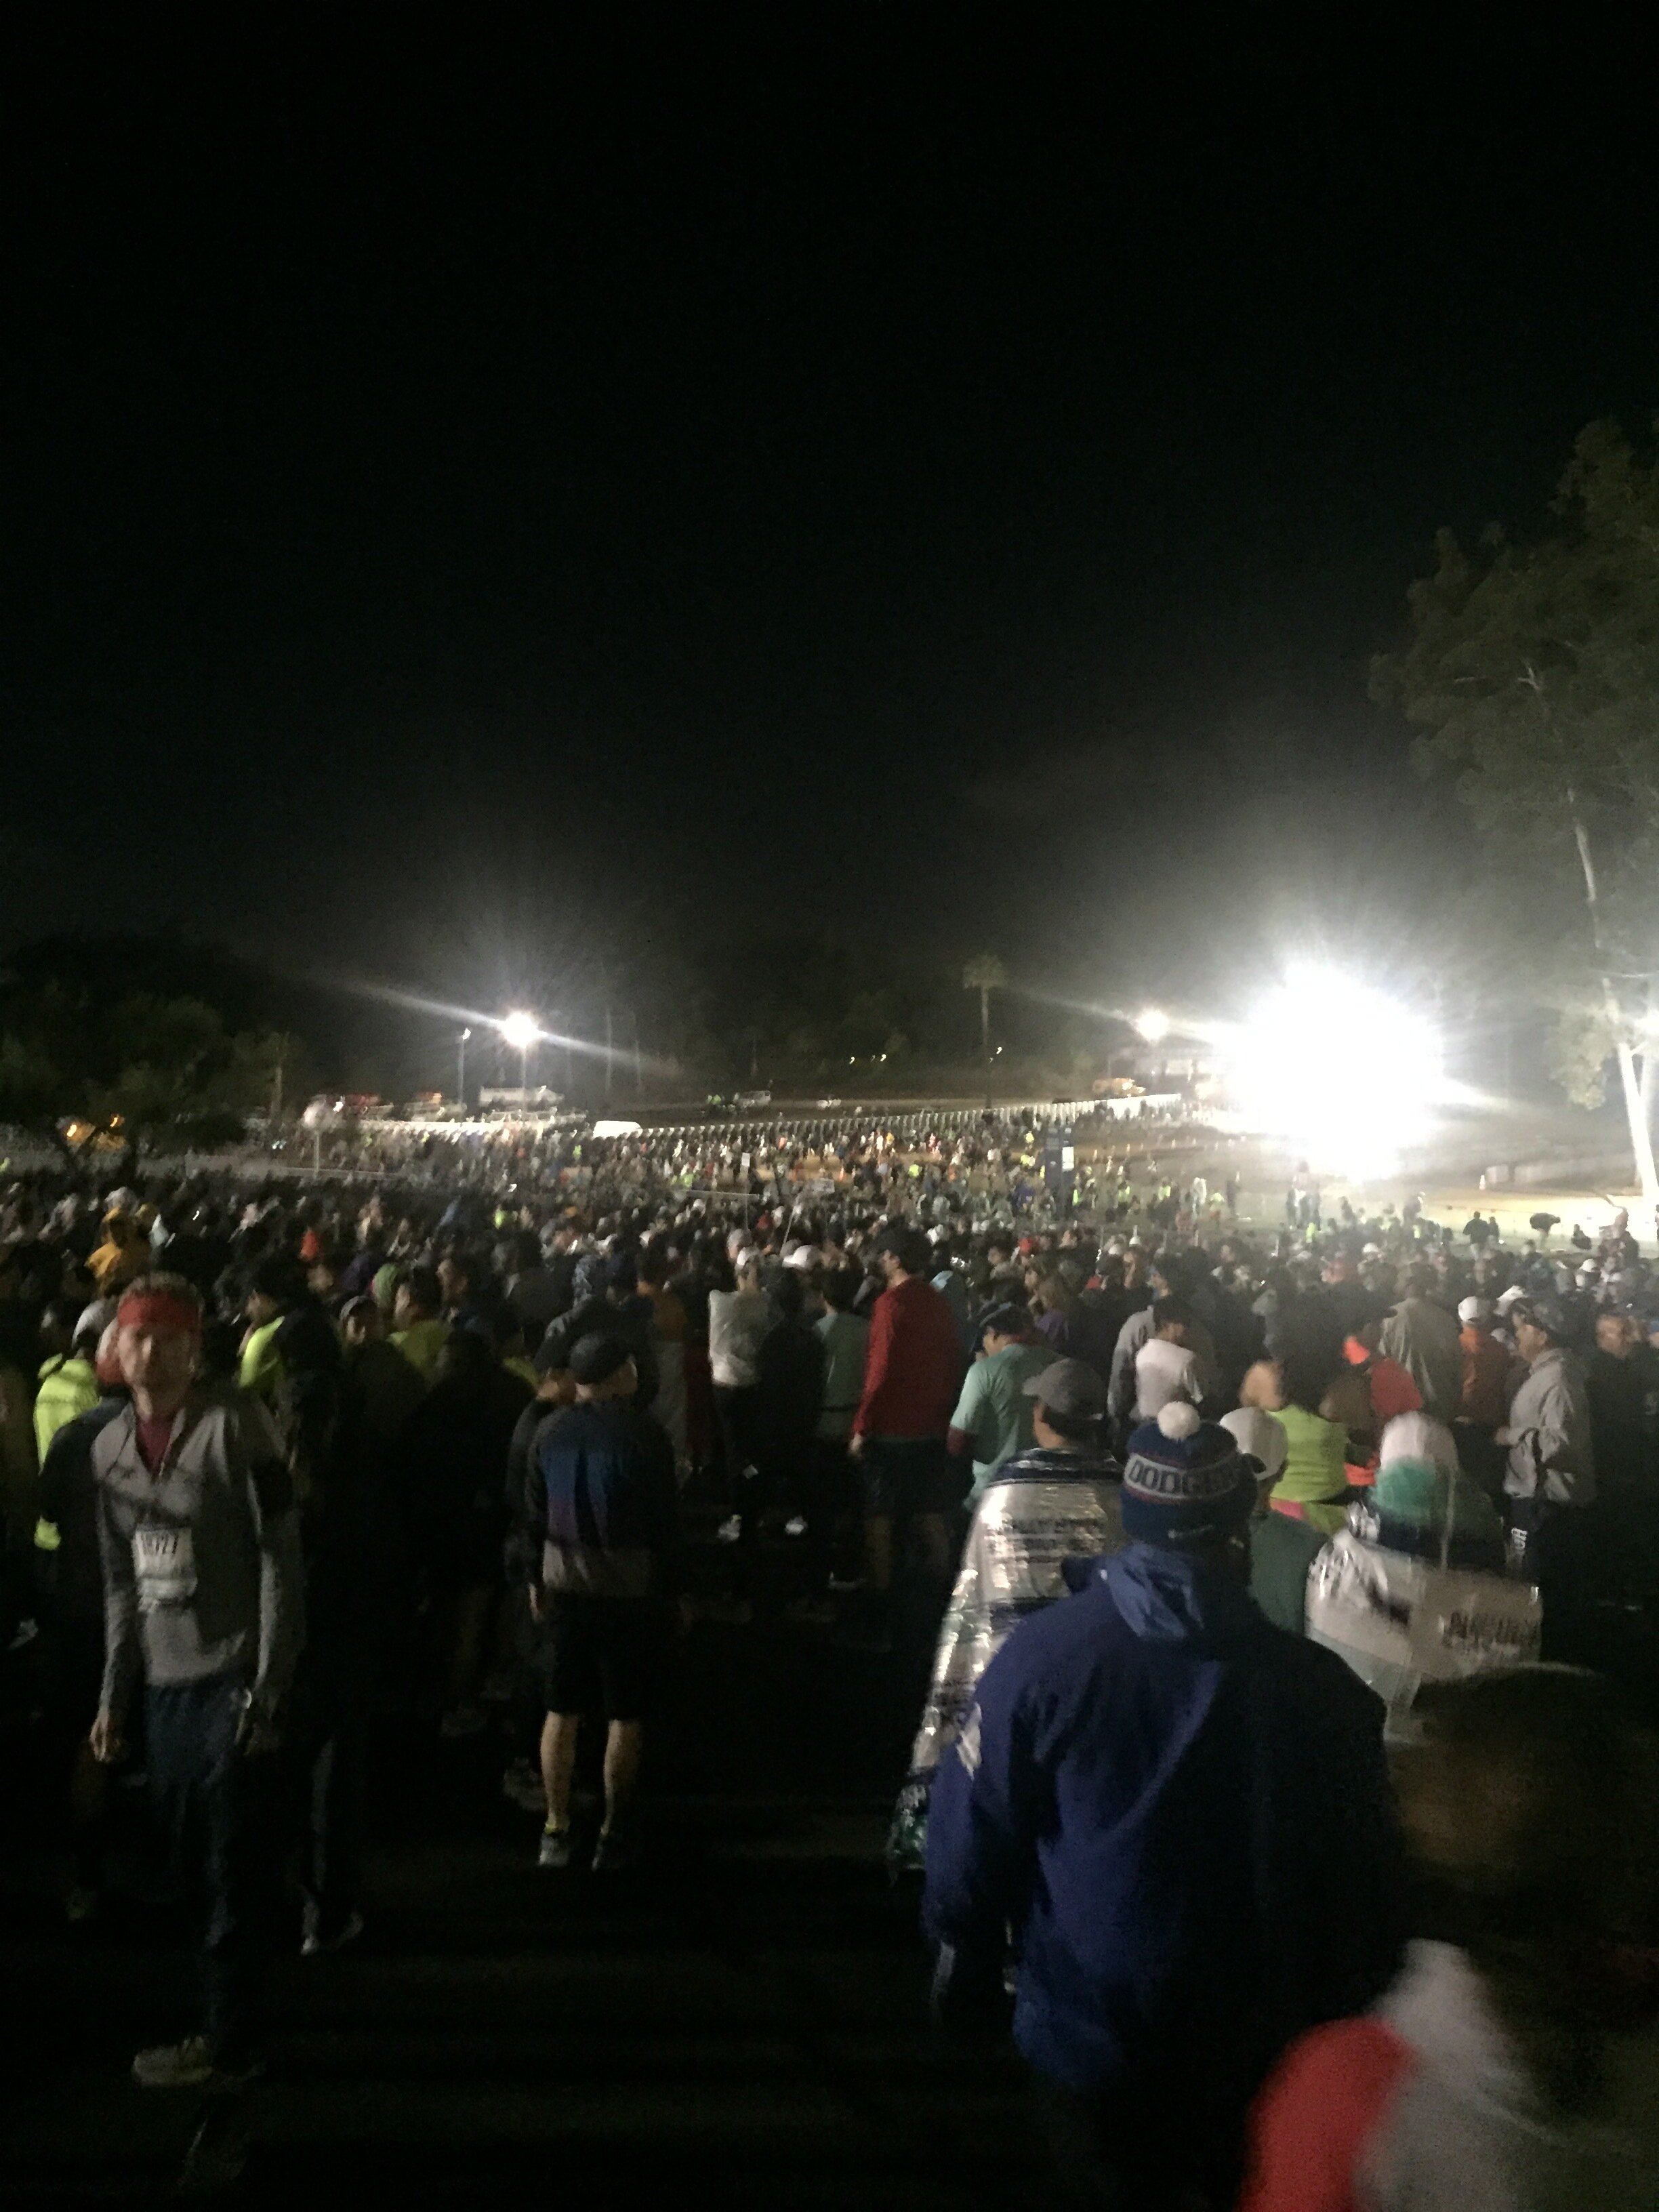 In the corral waiting for the start of the Los Angeles Marathon 2020.